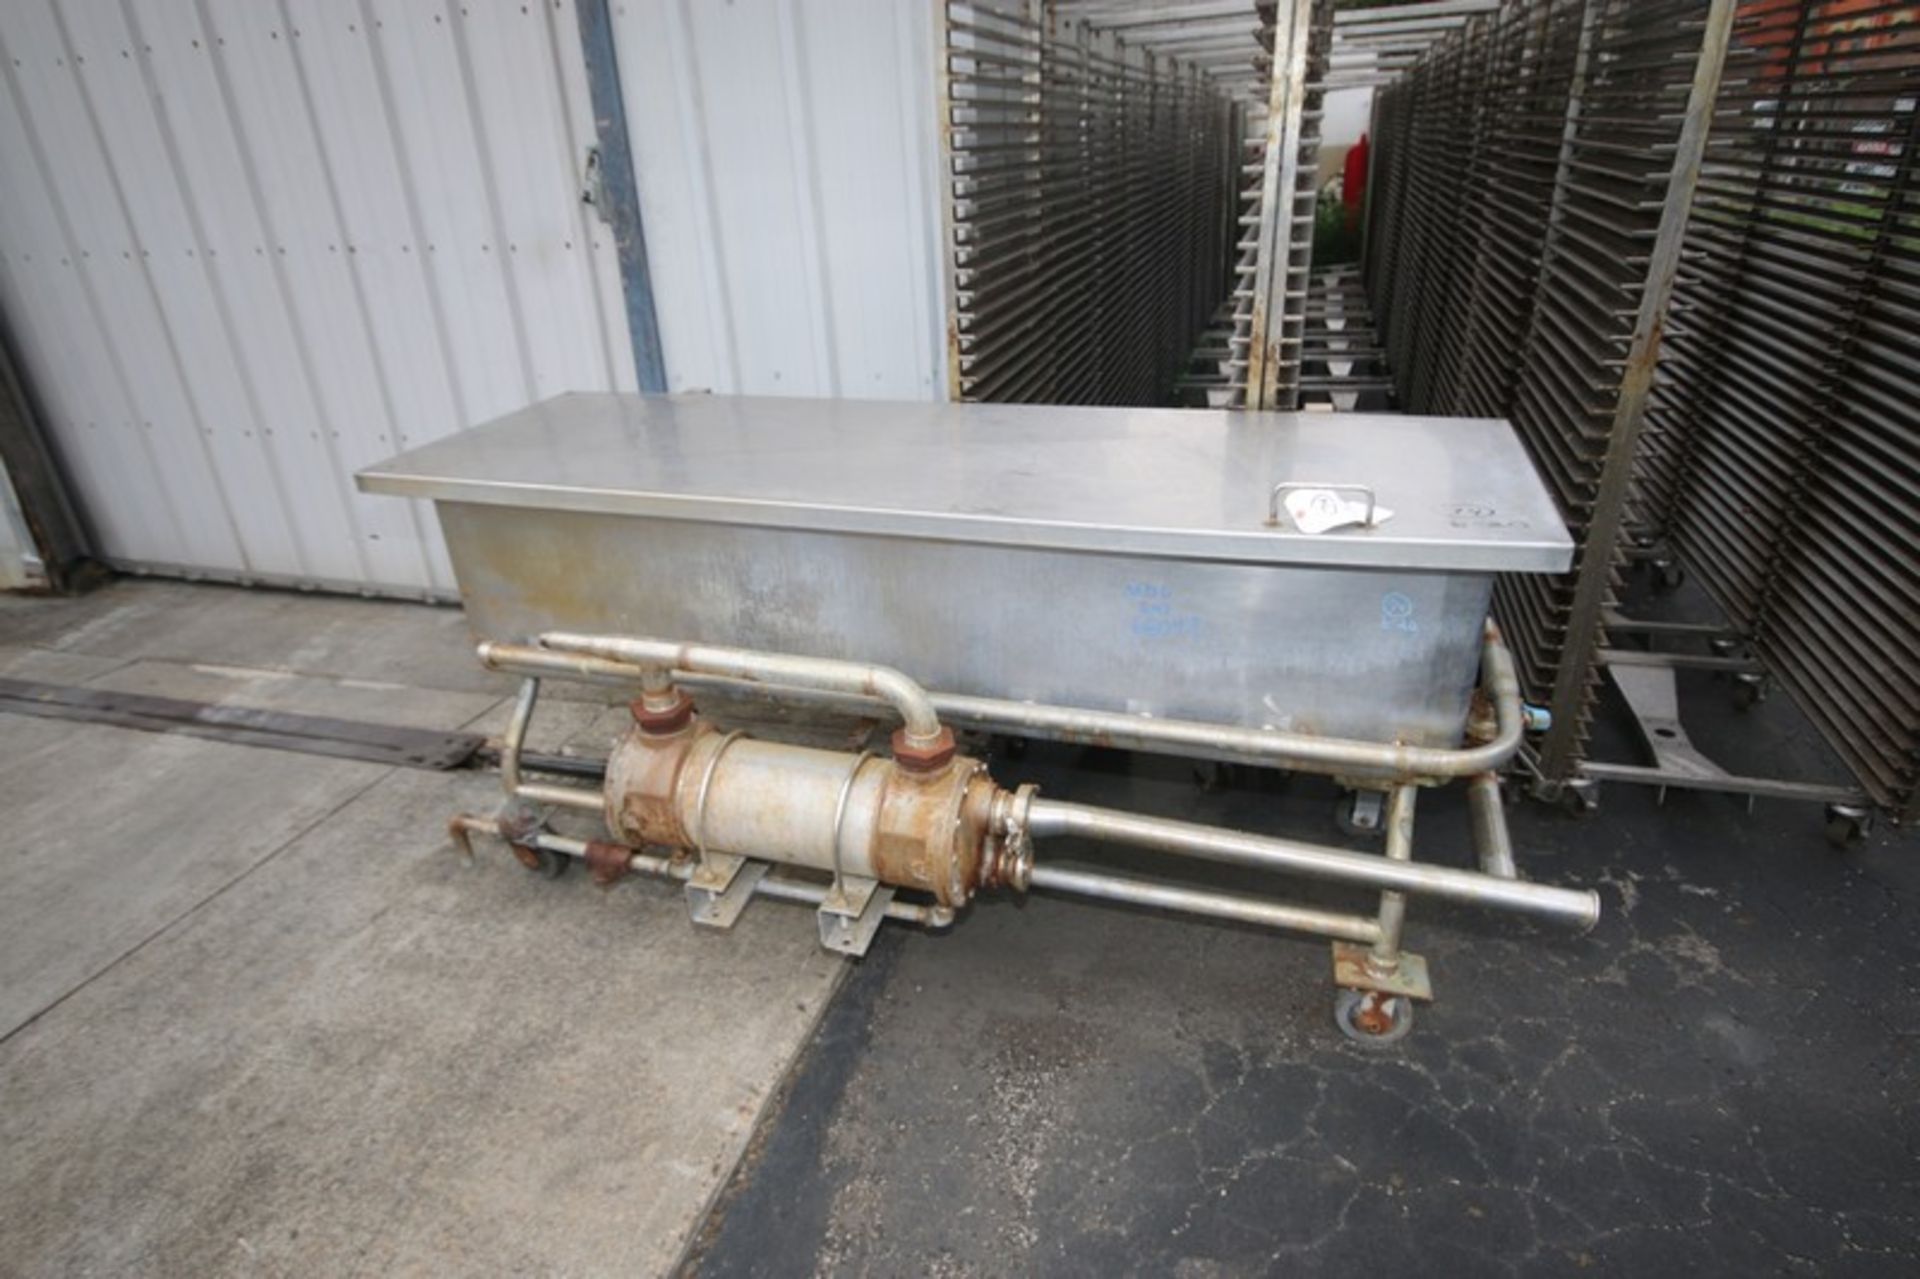 S/S Jet Spray COP Trough, with On Board Heat Exchanger, Overall Dims.: Aprox. 80" L x 38" W x 37" H - Image 2 of 6